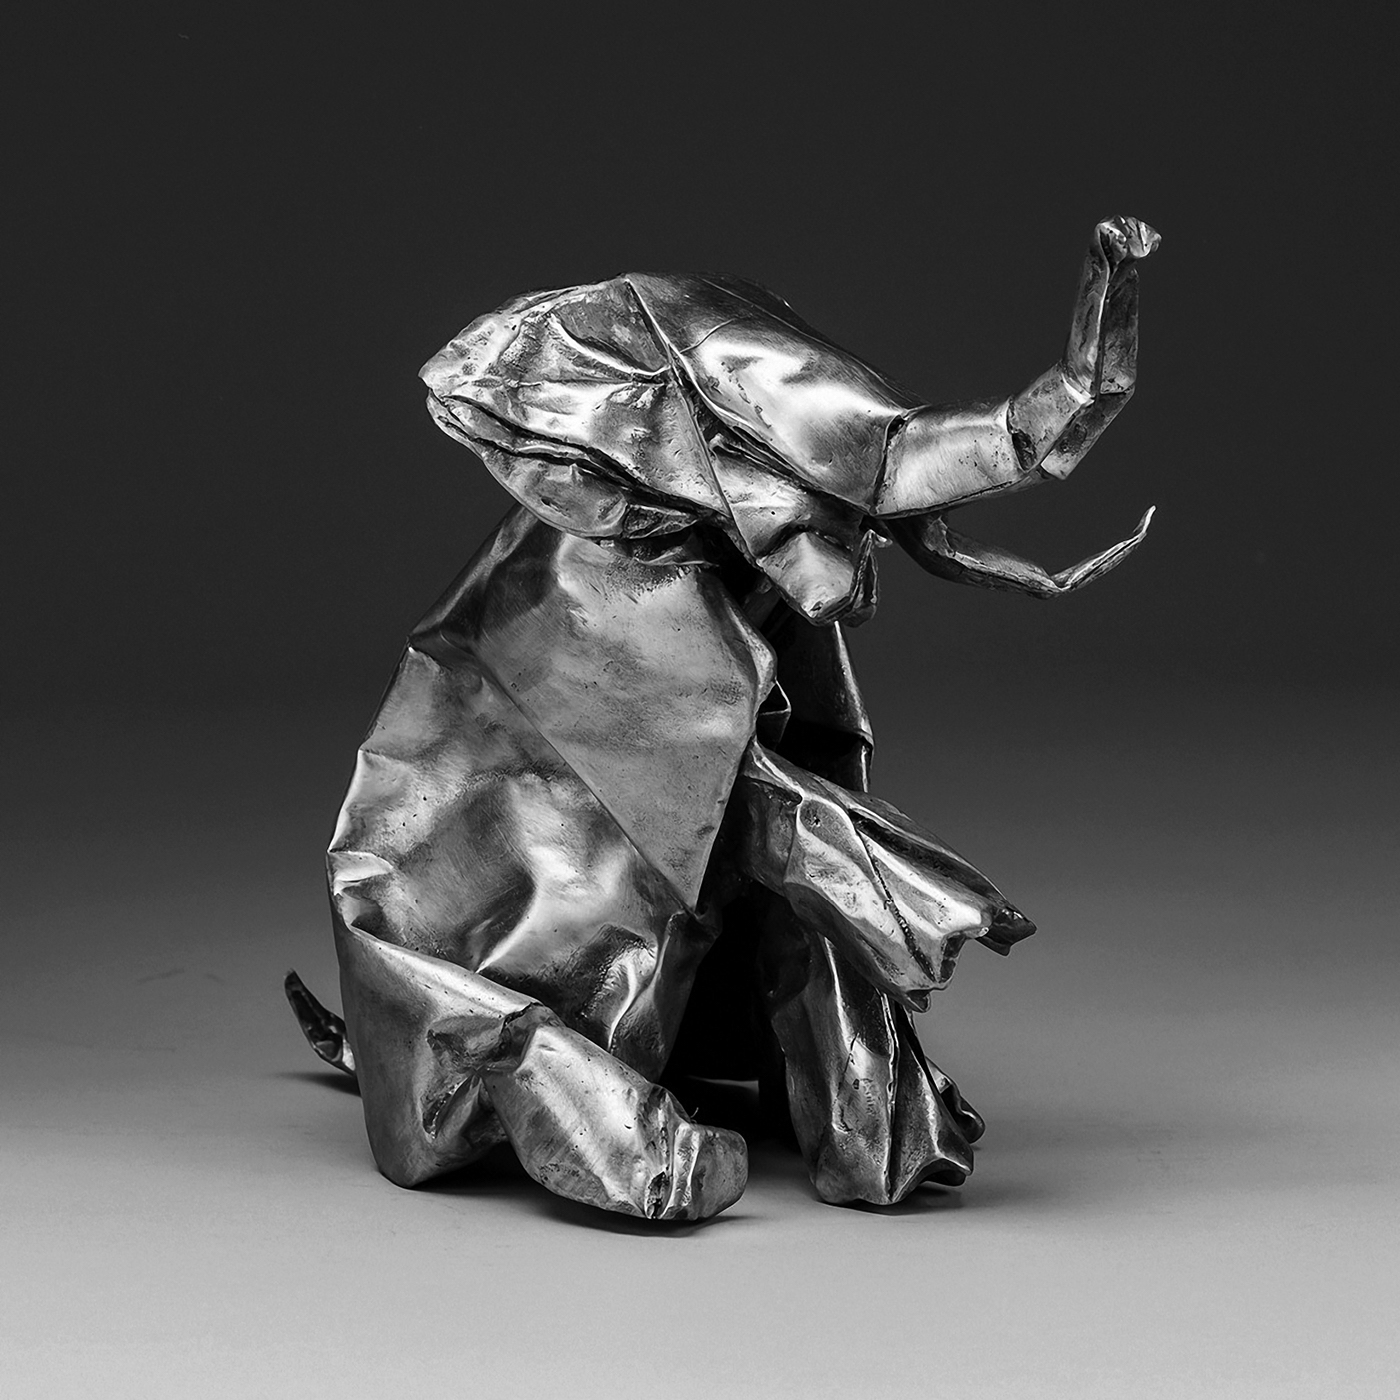 Jlin Announces New Album <i></noscript>Black Origami</i>, Featuring William Basinski and Holly Herndon Collaborations” title=”Jlin_BlackOrigami_cover-1489512034″ data-original-id=”230861″ data-adjusted-id=”230861″ class=”sm_size_full_width sm_alignment_center ” />
</div>
</div>
</div>
</div>
</div>
</section>
<section data-particle_enable=